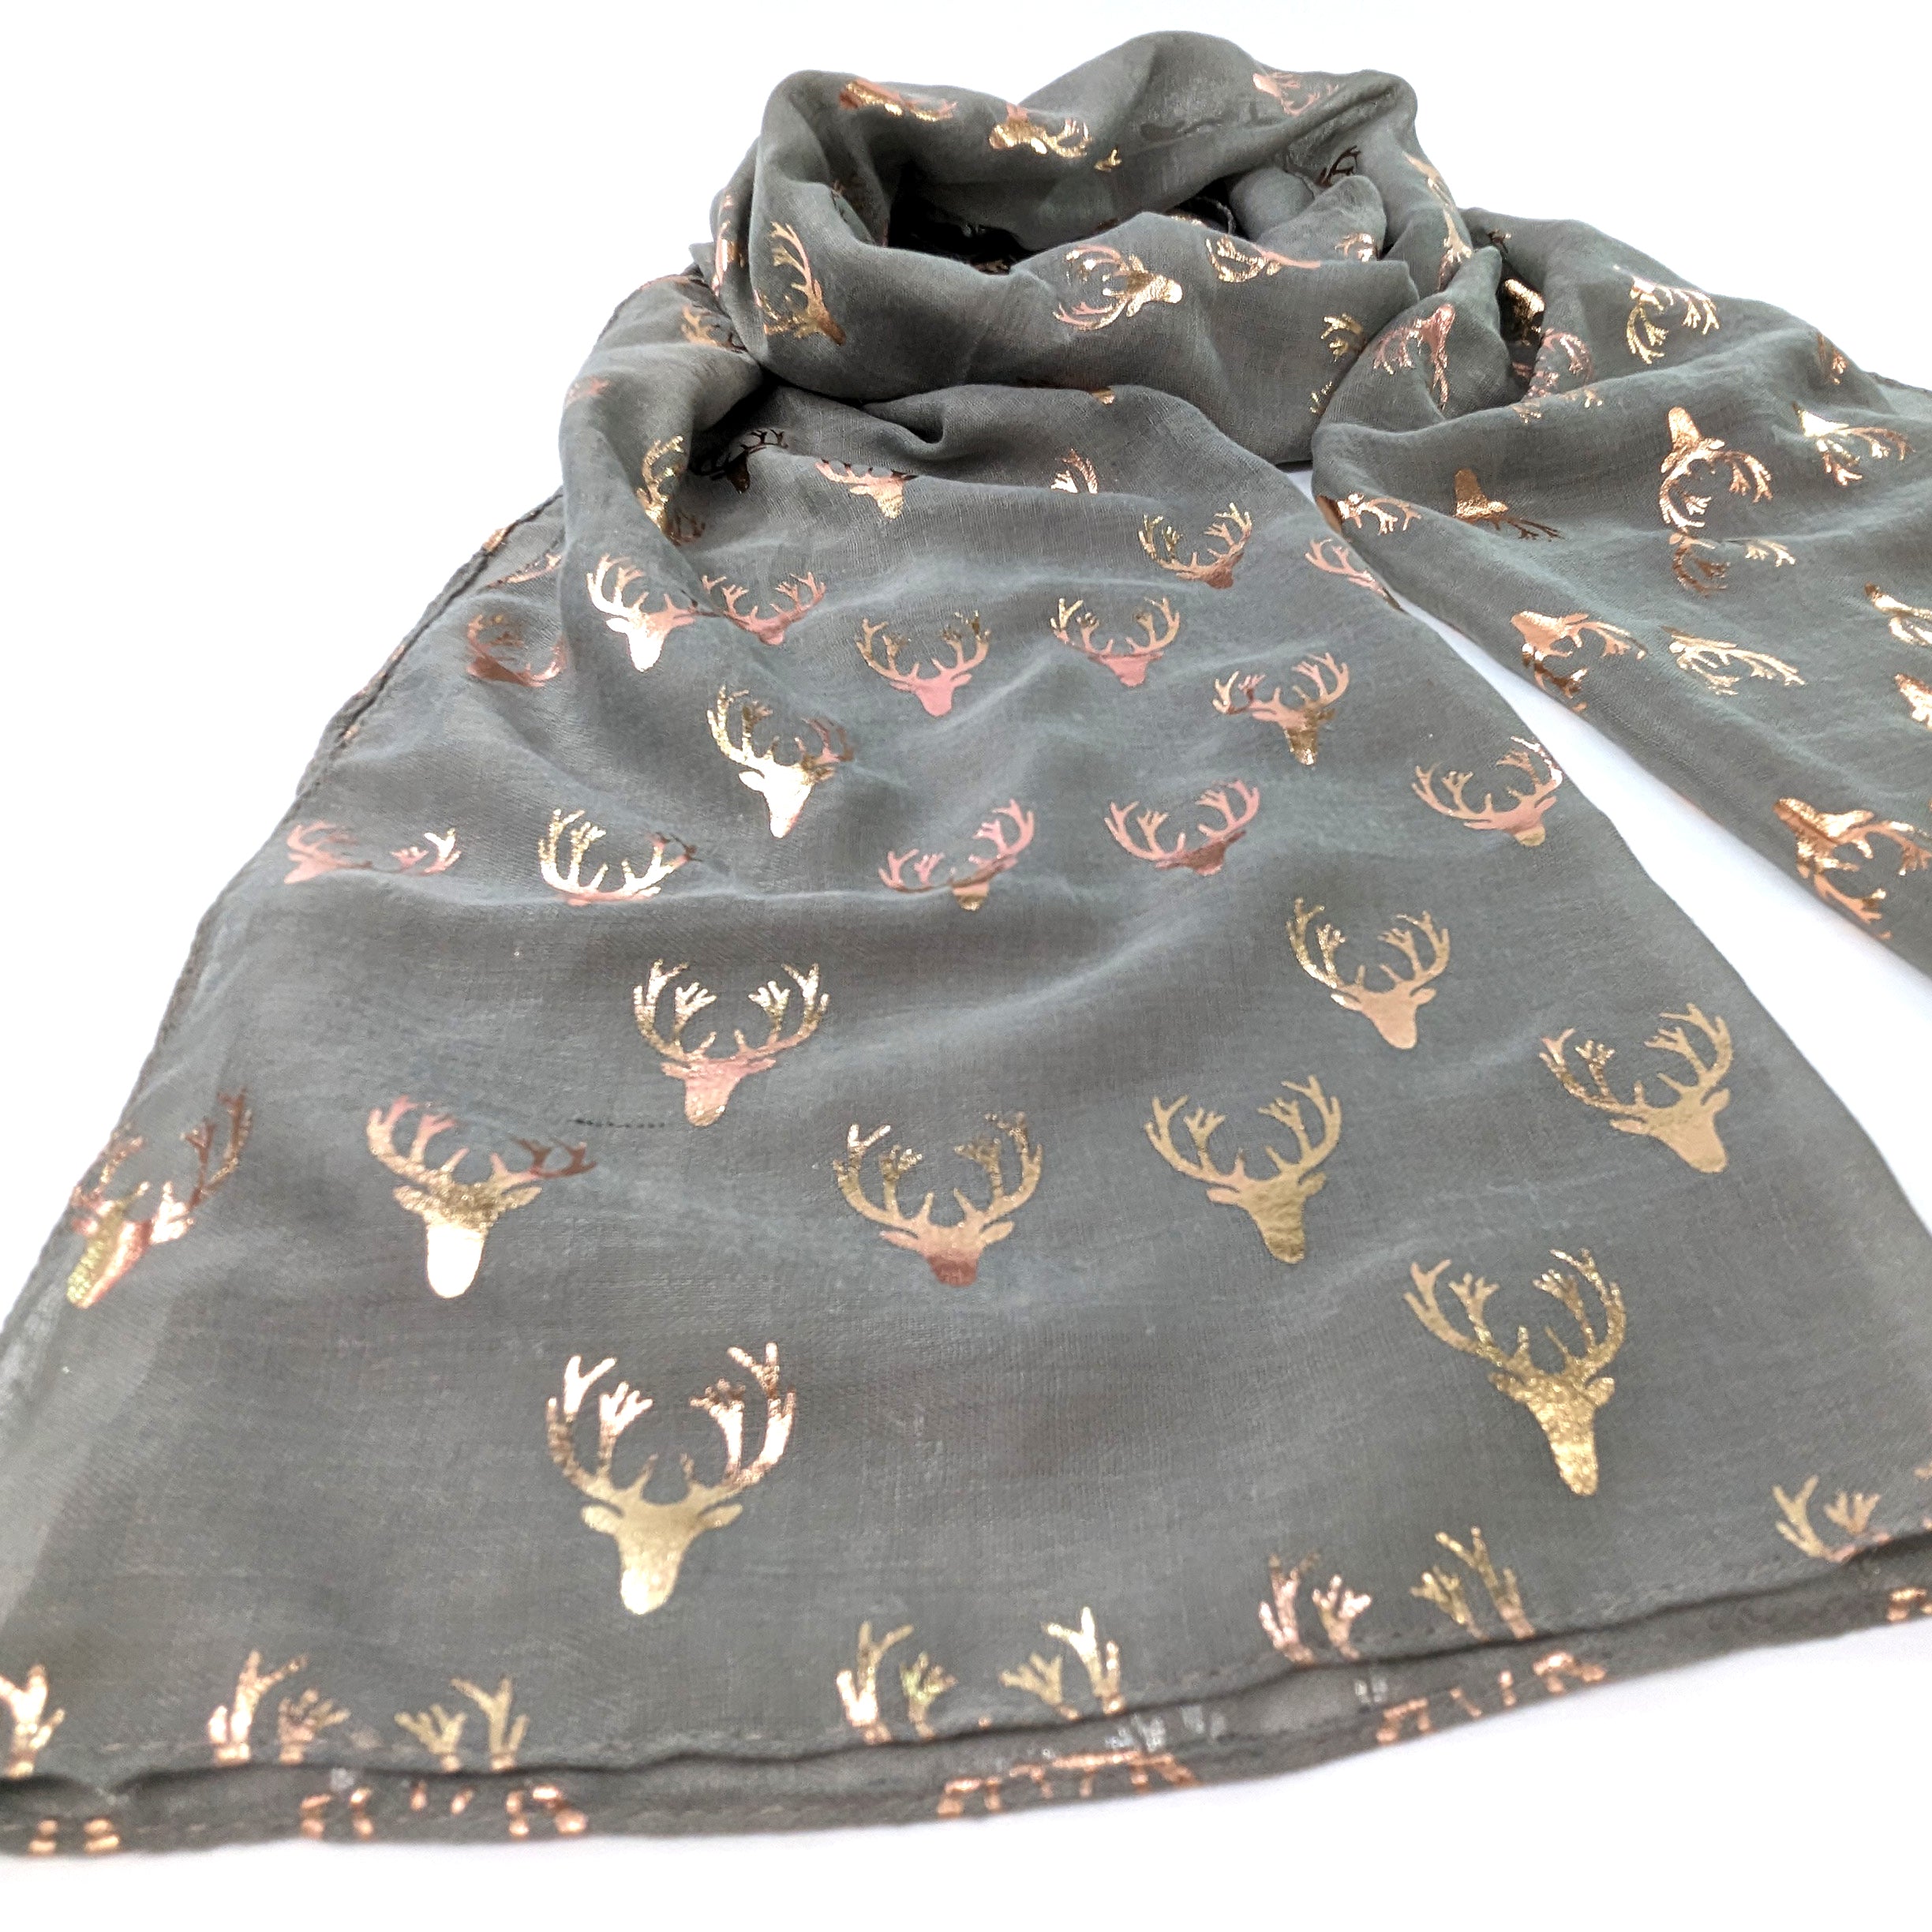 Seli - Stag Head Scarf - Rose Gold on Grey